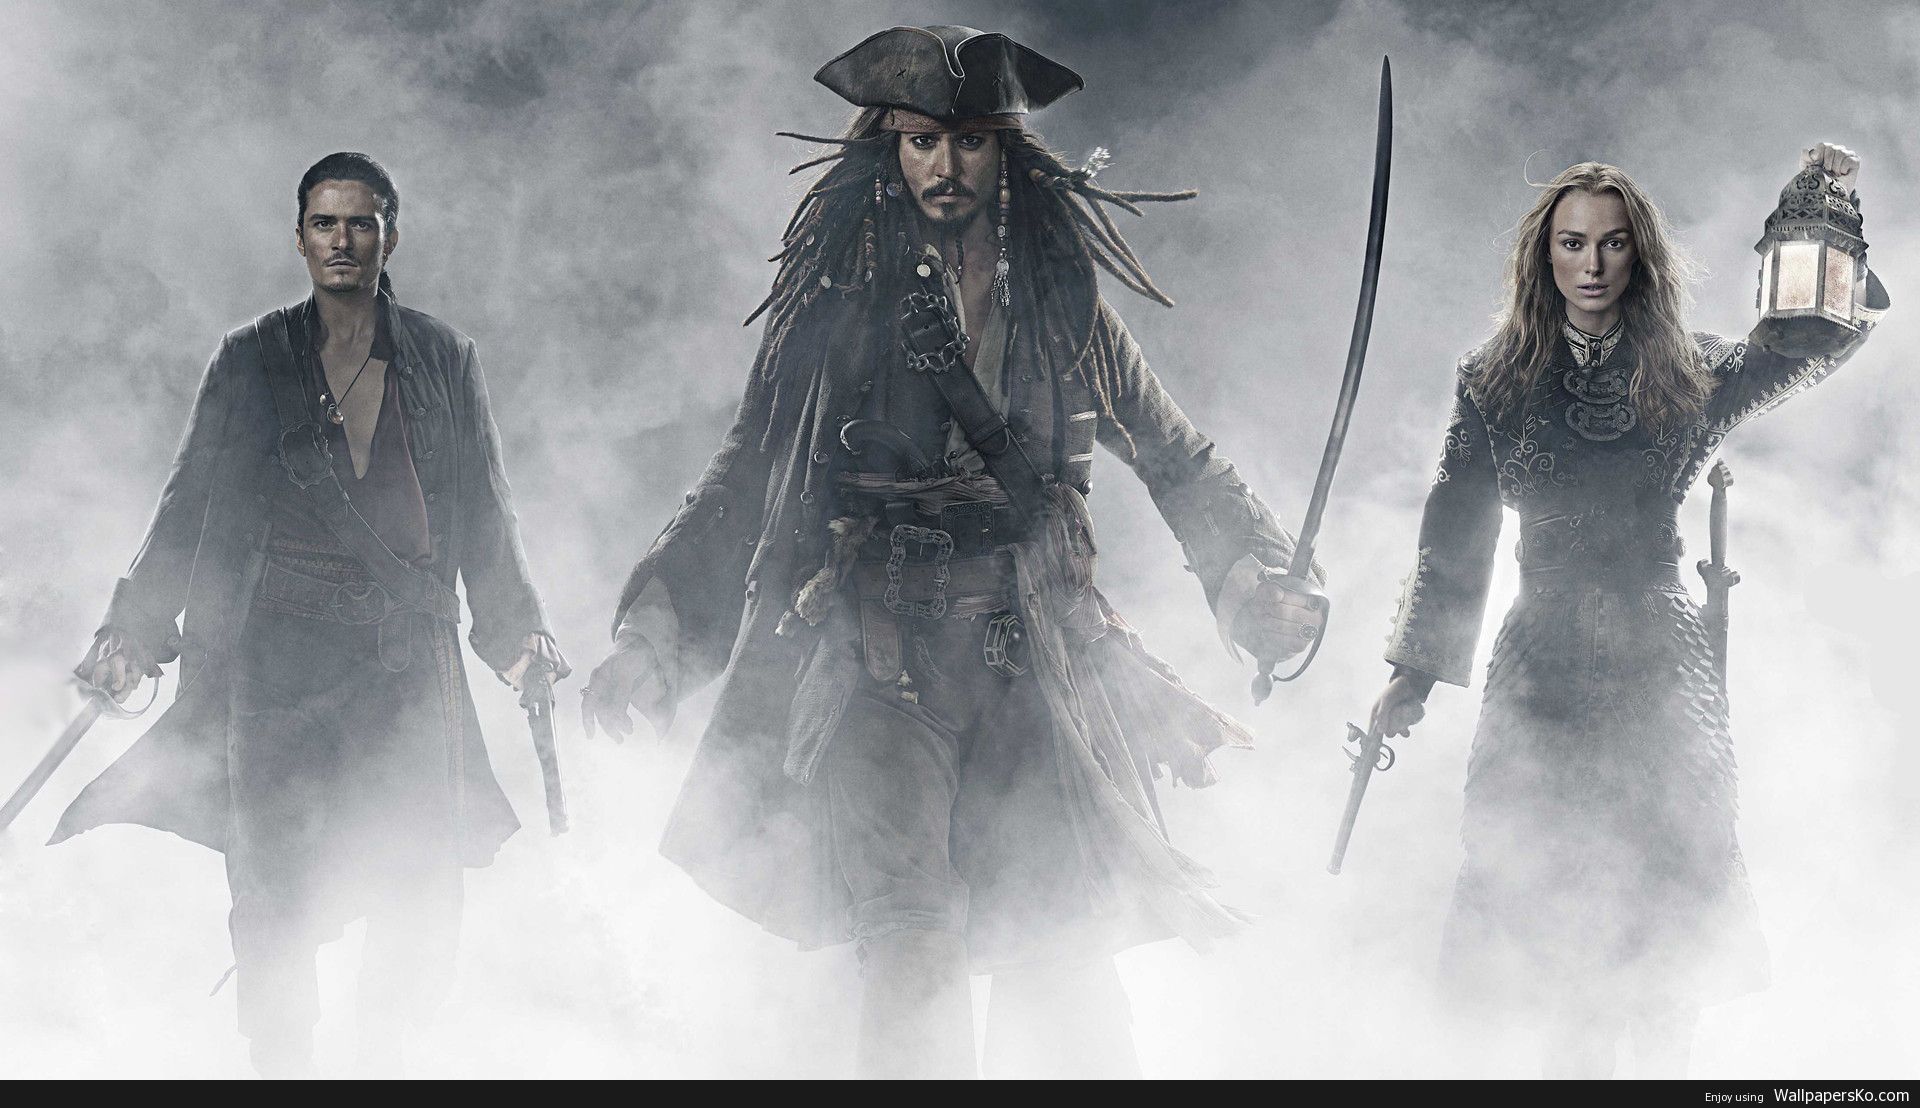 pirates of the caribbean 3